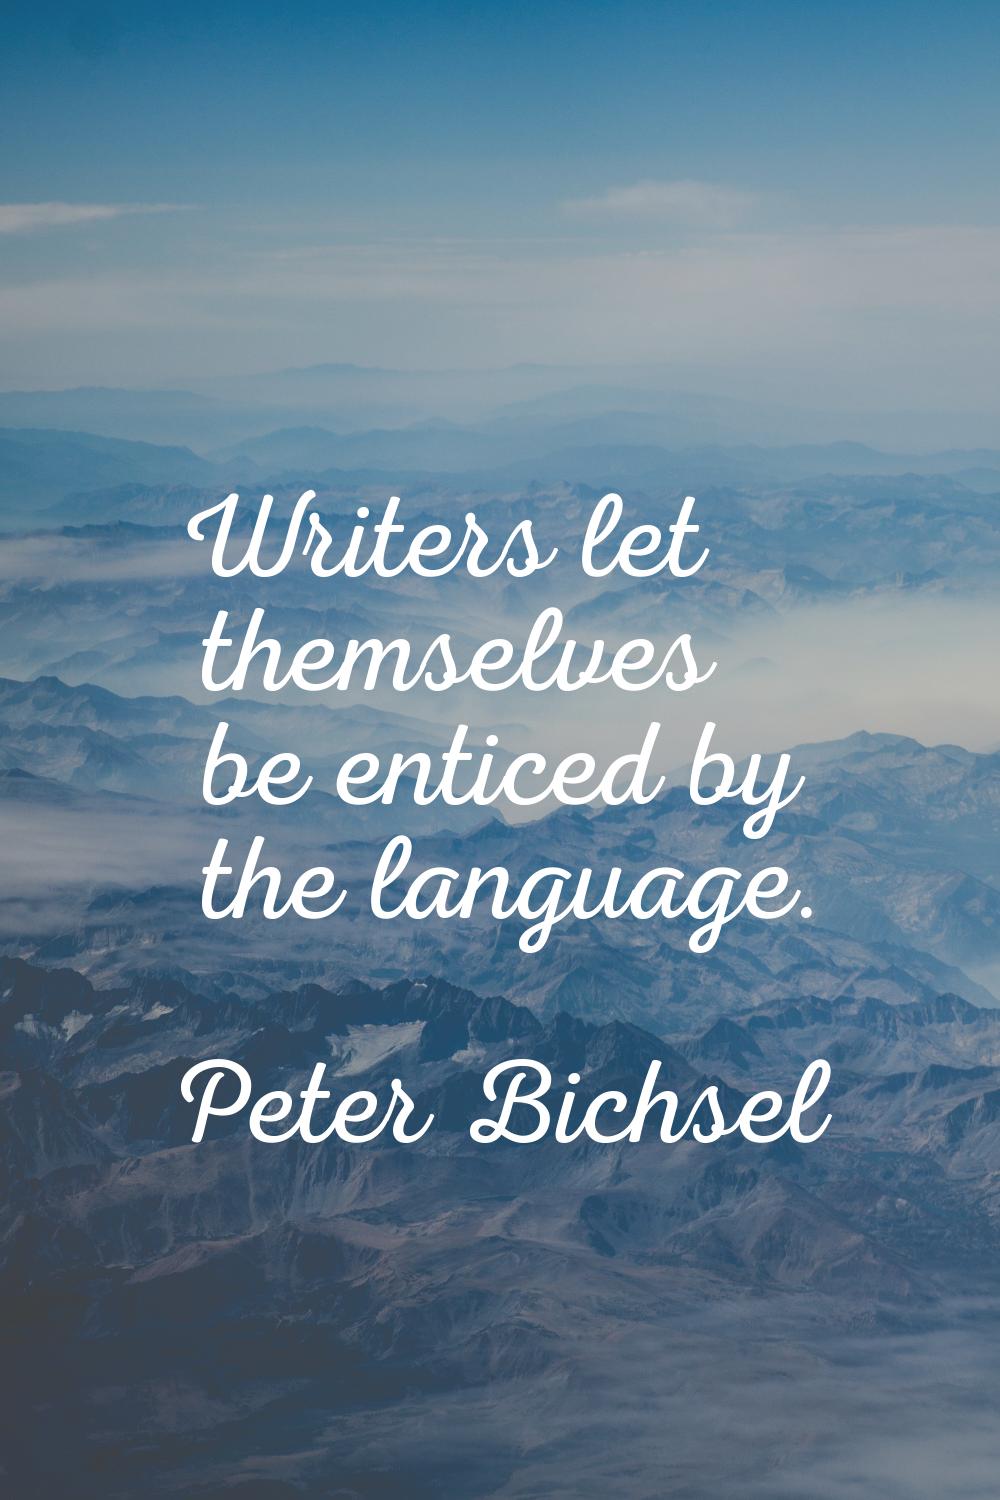 Writers let themselves be enticed by the language.